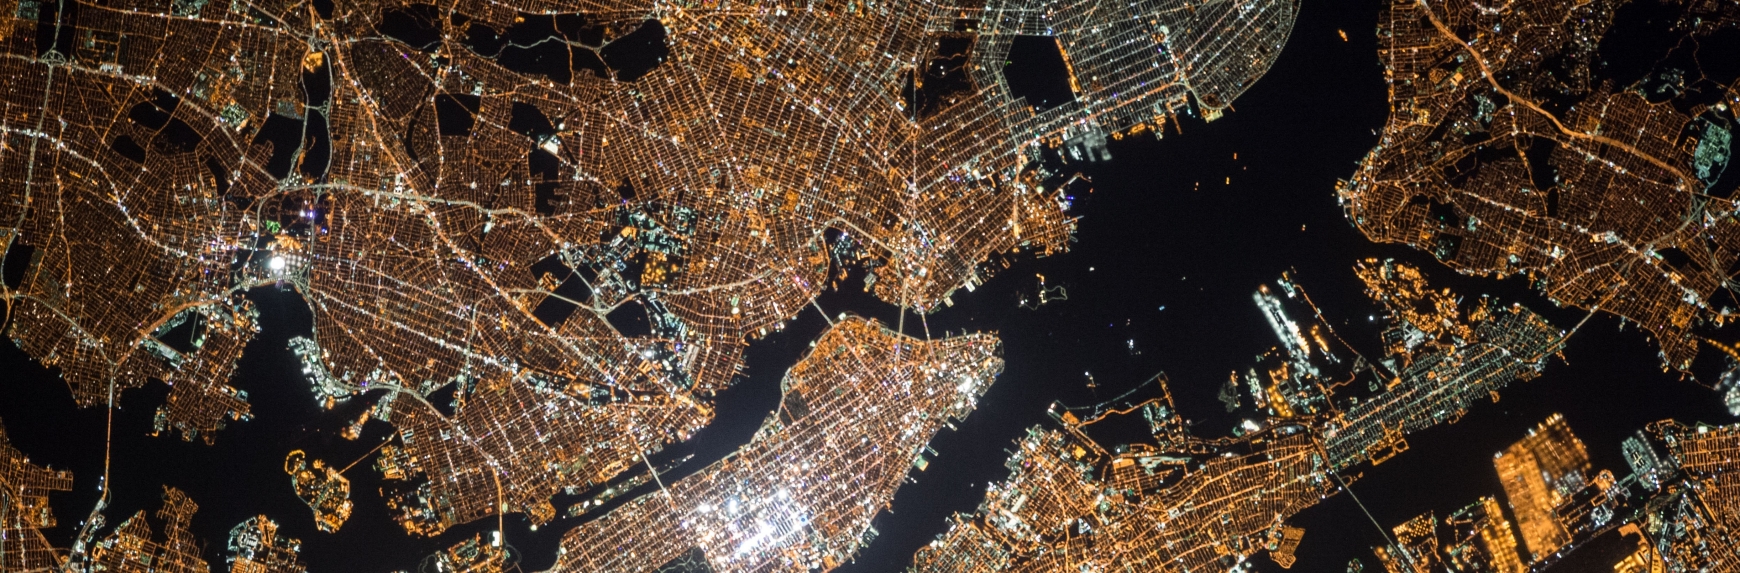 An arial view of a city lights at night